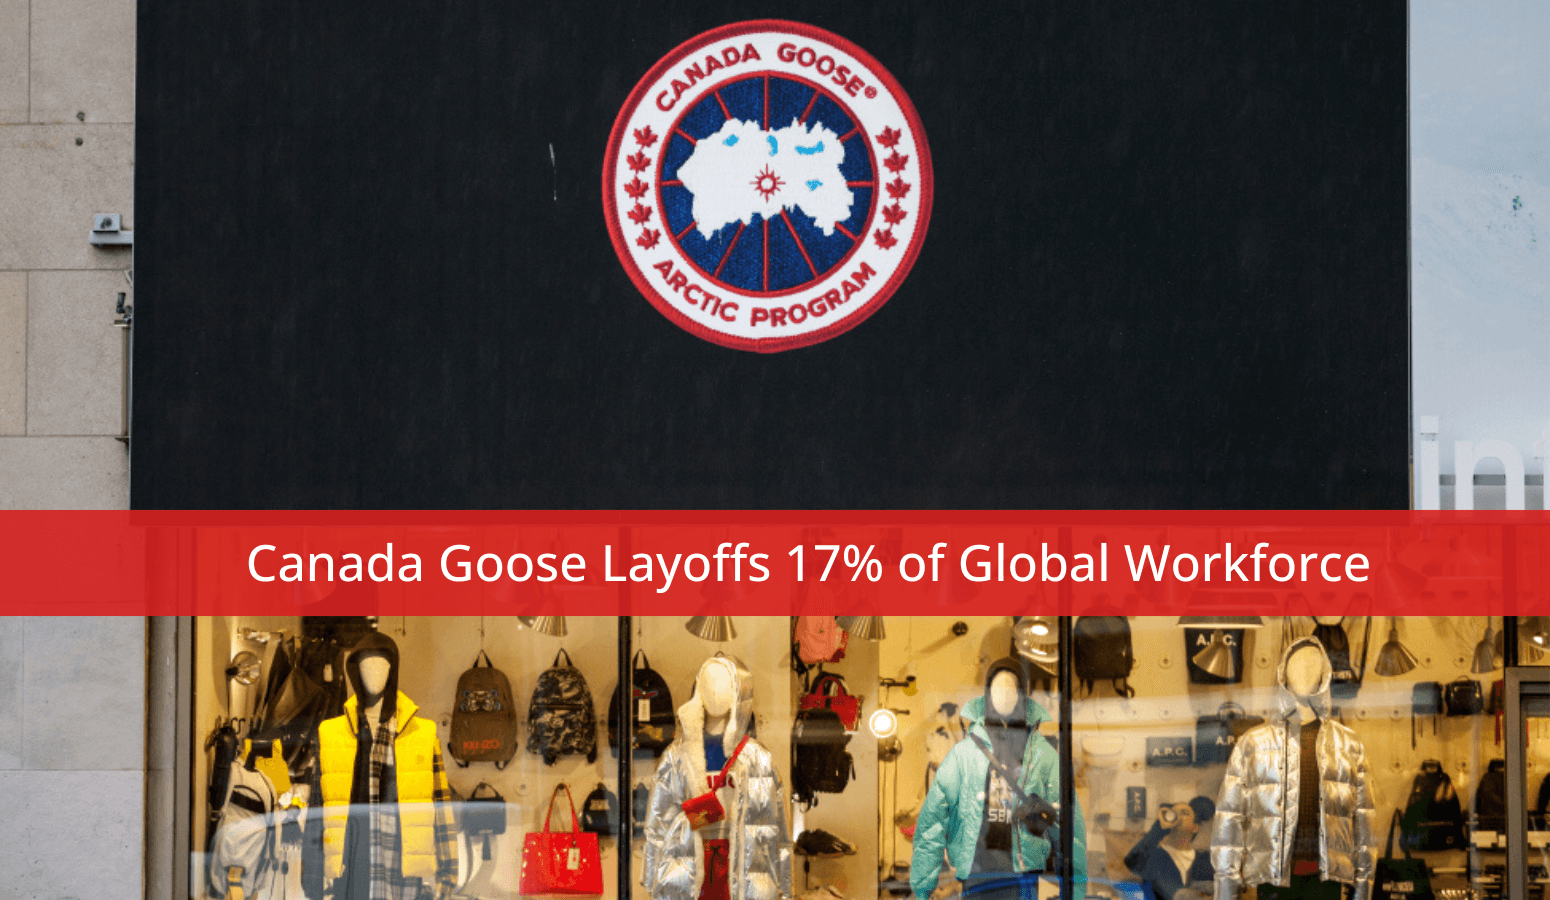 Featured image for “Canada Goose Layoffs 17% of Global Workforce”